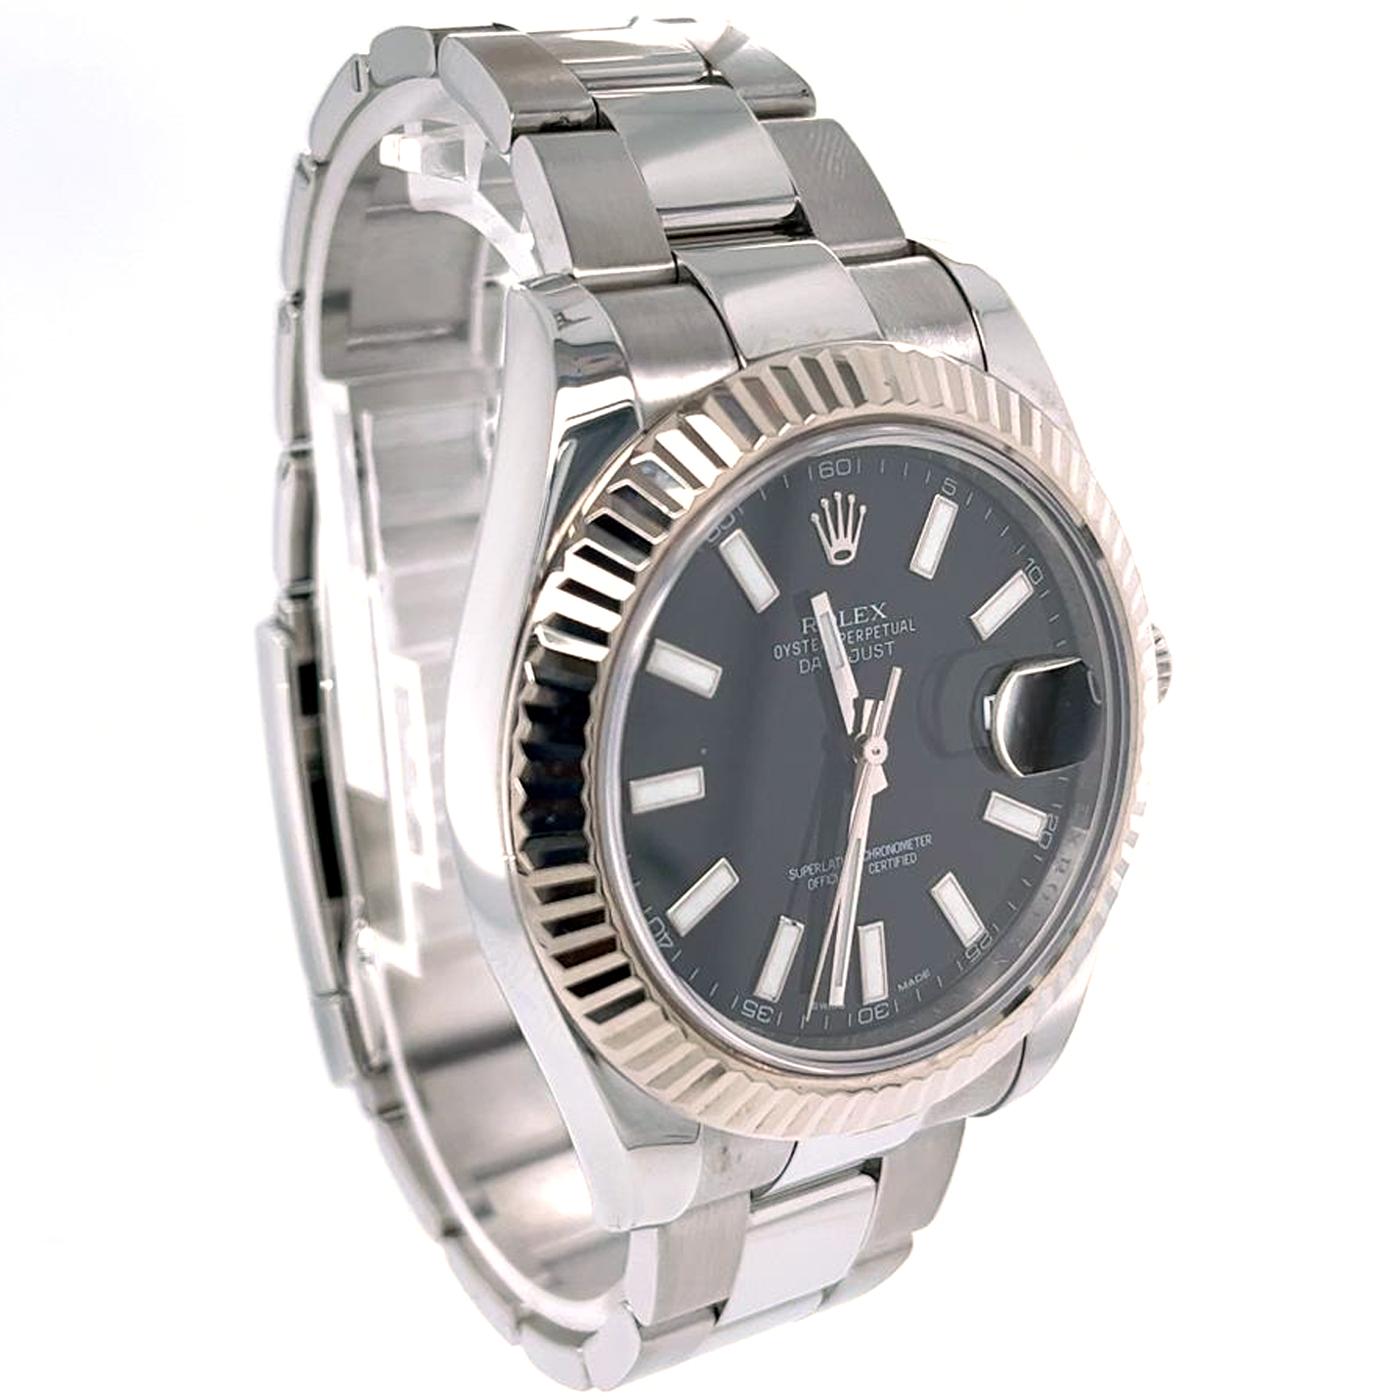 Rolex Datejust II Black Index Dial Stainless Steel Men's Watch 116334 For Sale 4